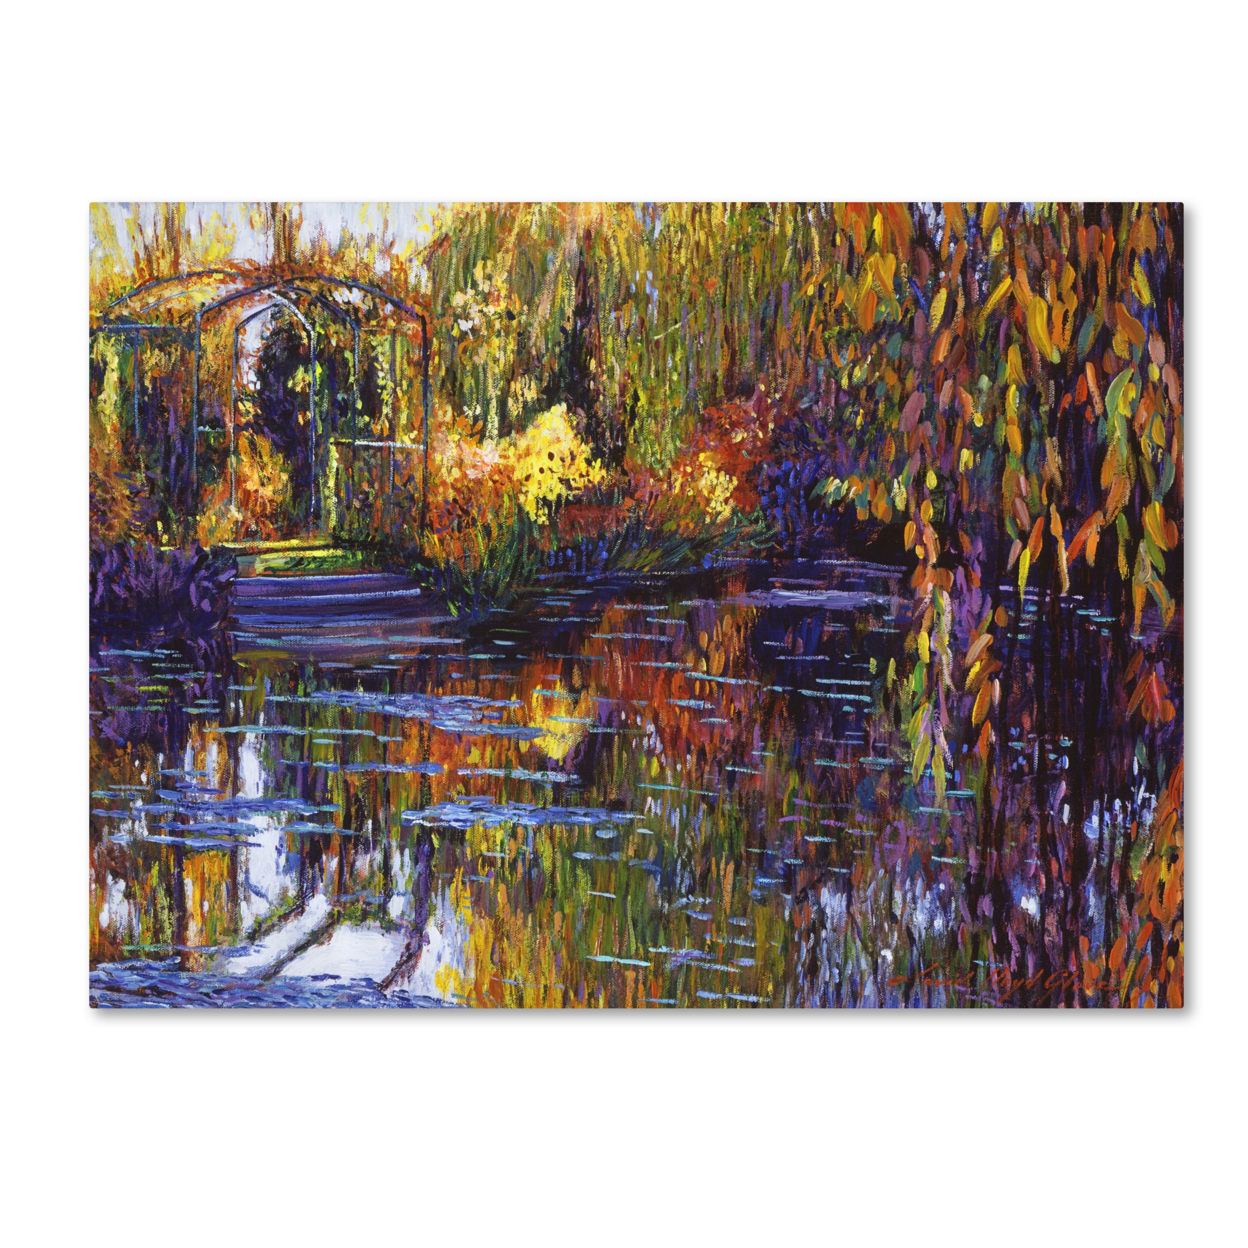 David Lloyd Glover 'Tapestry Reflection' Canvas Wall Art 35 X 47 Inches